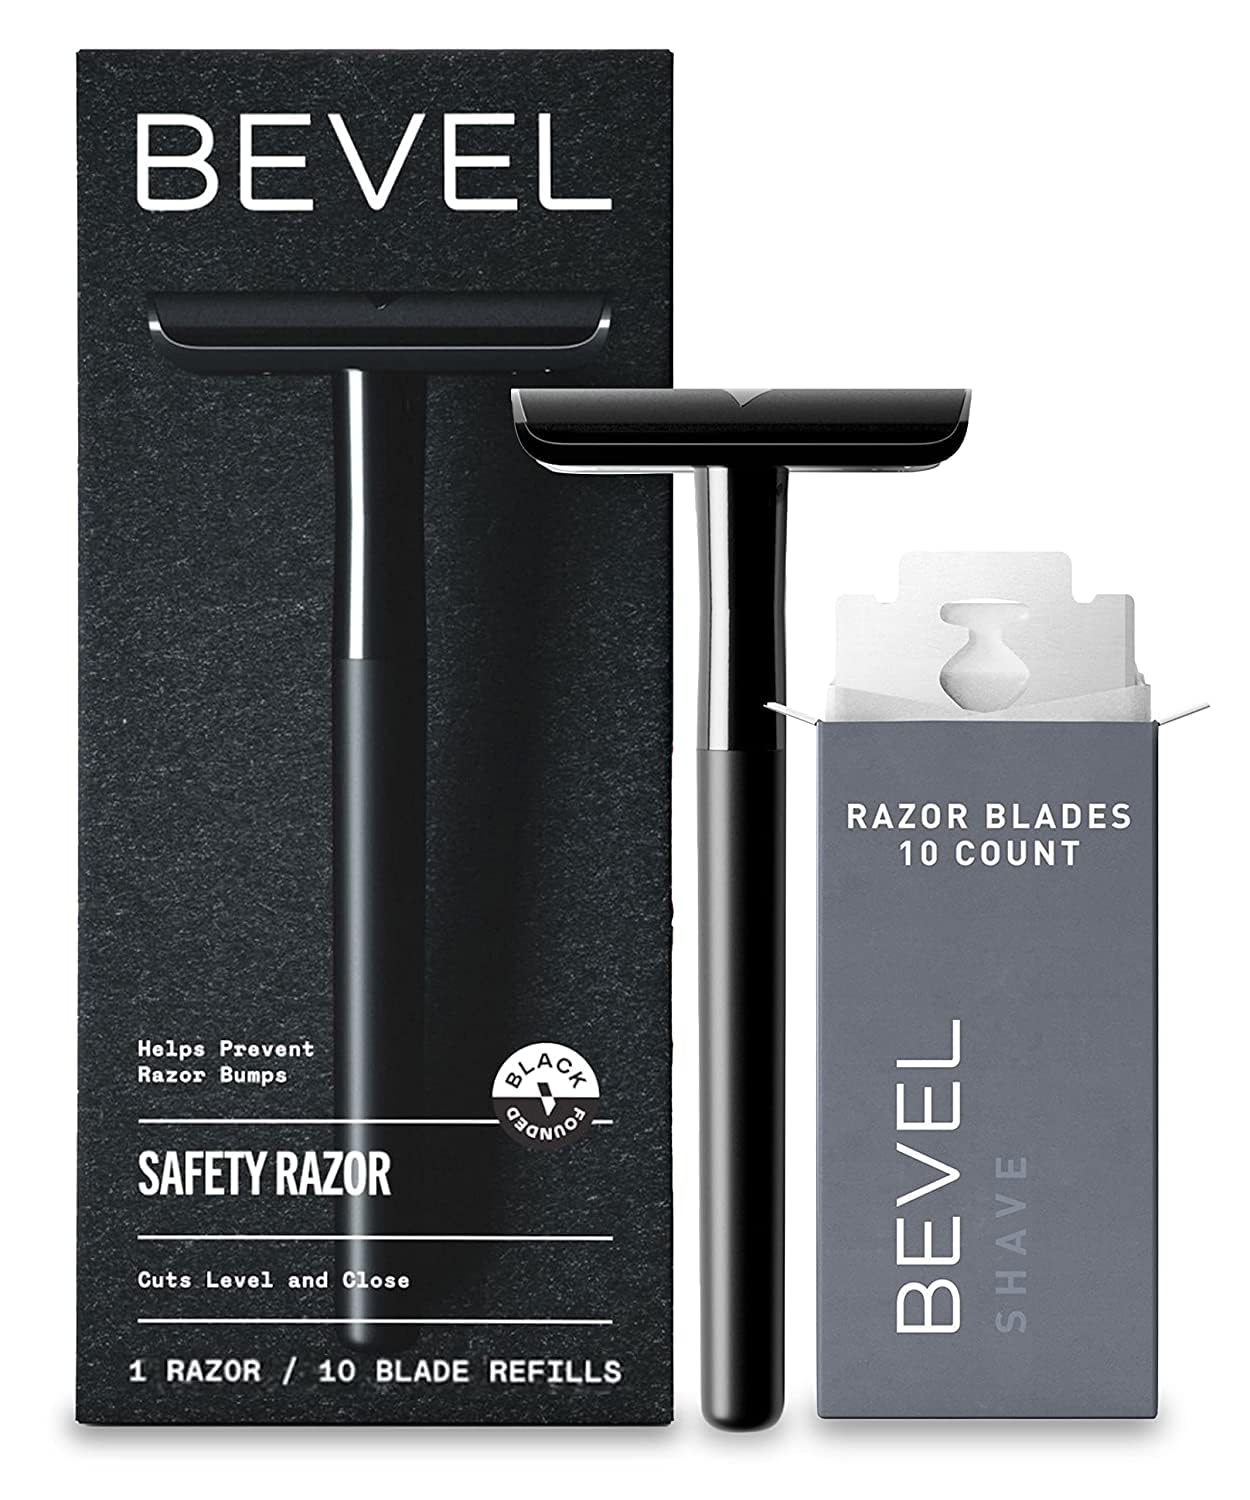 Bevel Safety Razor with Brass Weighted Handle and 10 Double Edge Safety Razor Blade Refills, Single Blade Razor for Men, Designed for Coarse Hair to Prevent Razor Bumps, Black